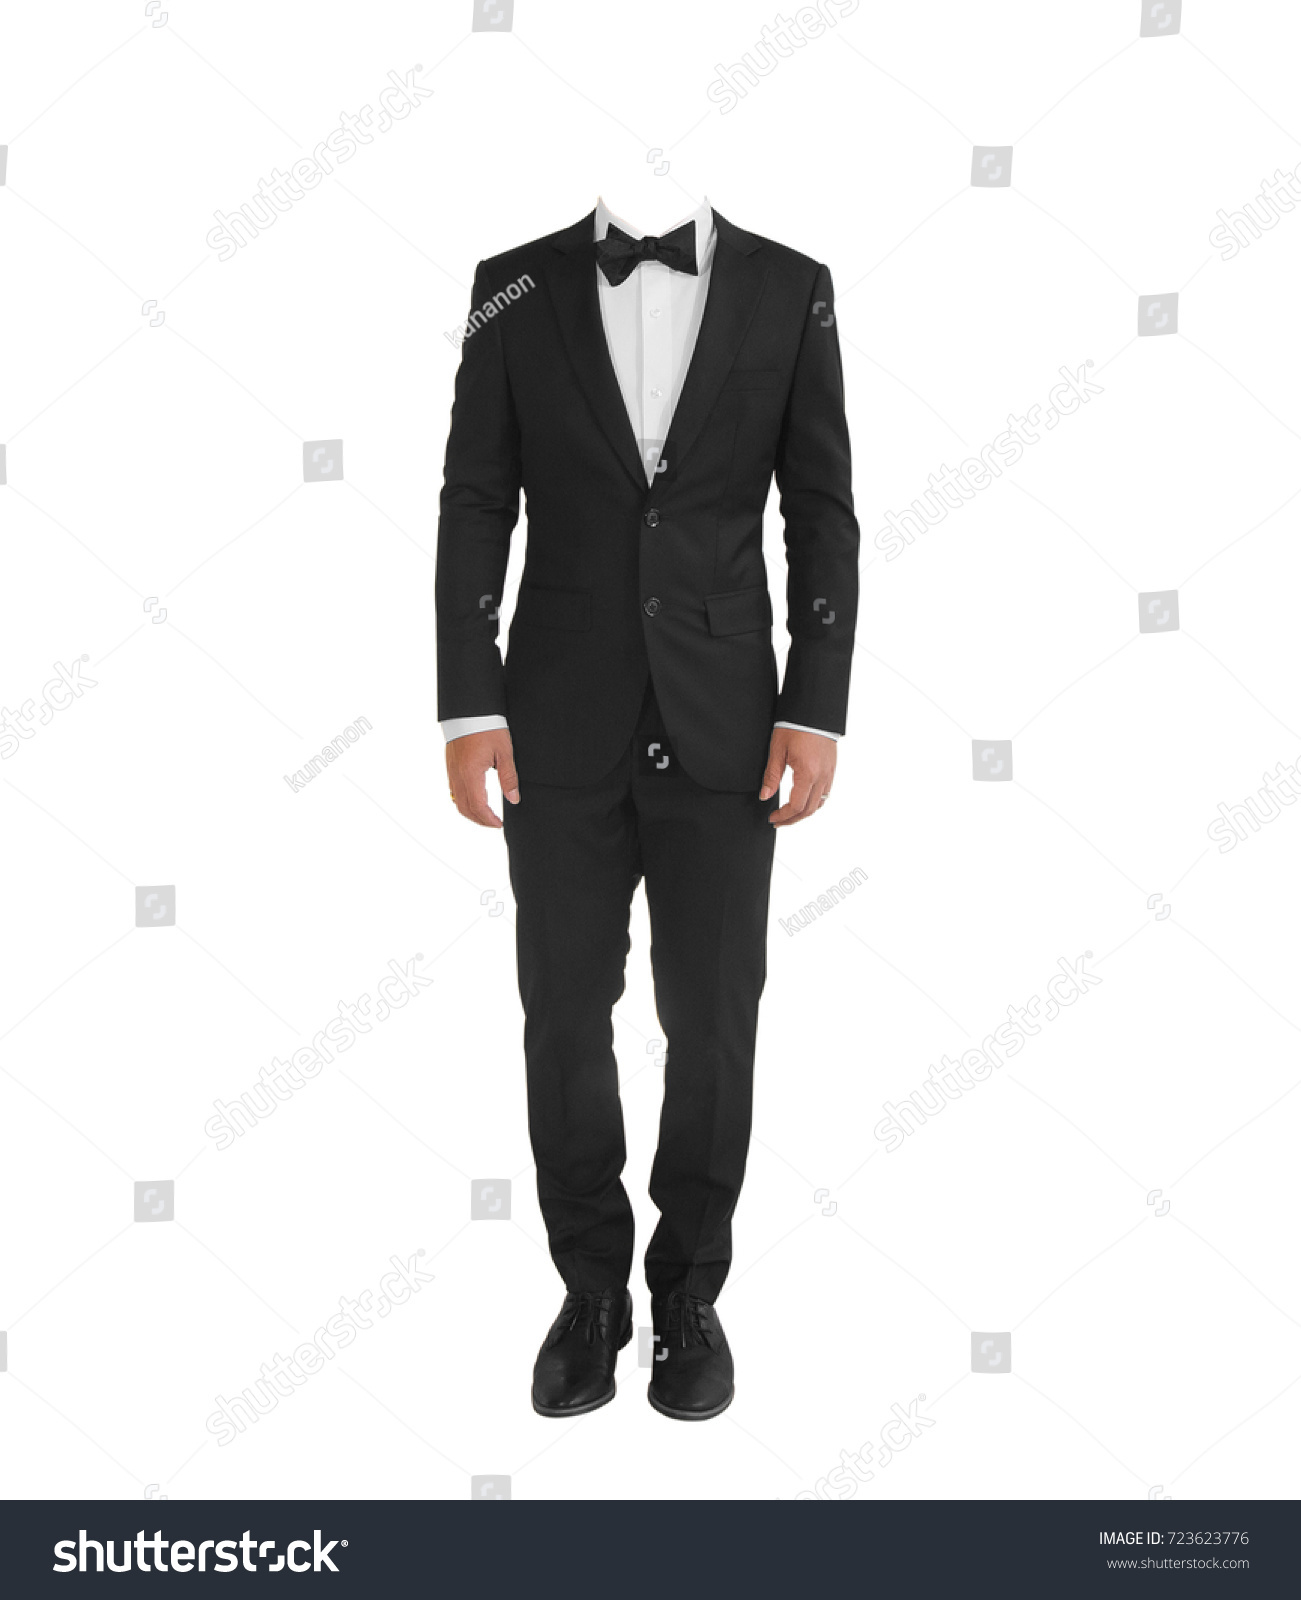 black tuxedo suit - isolated with clipping path #723623776